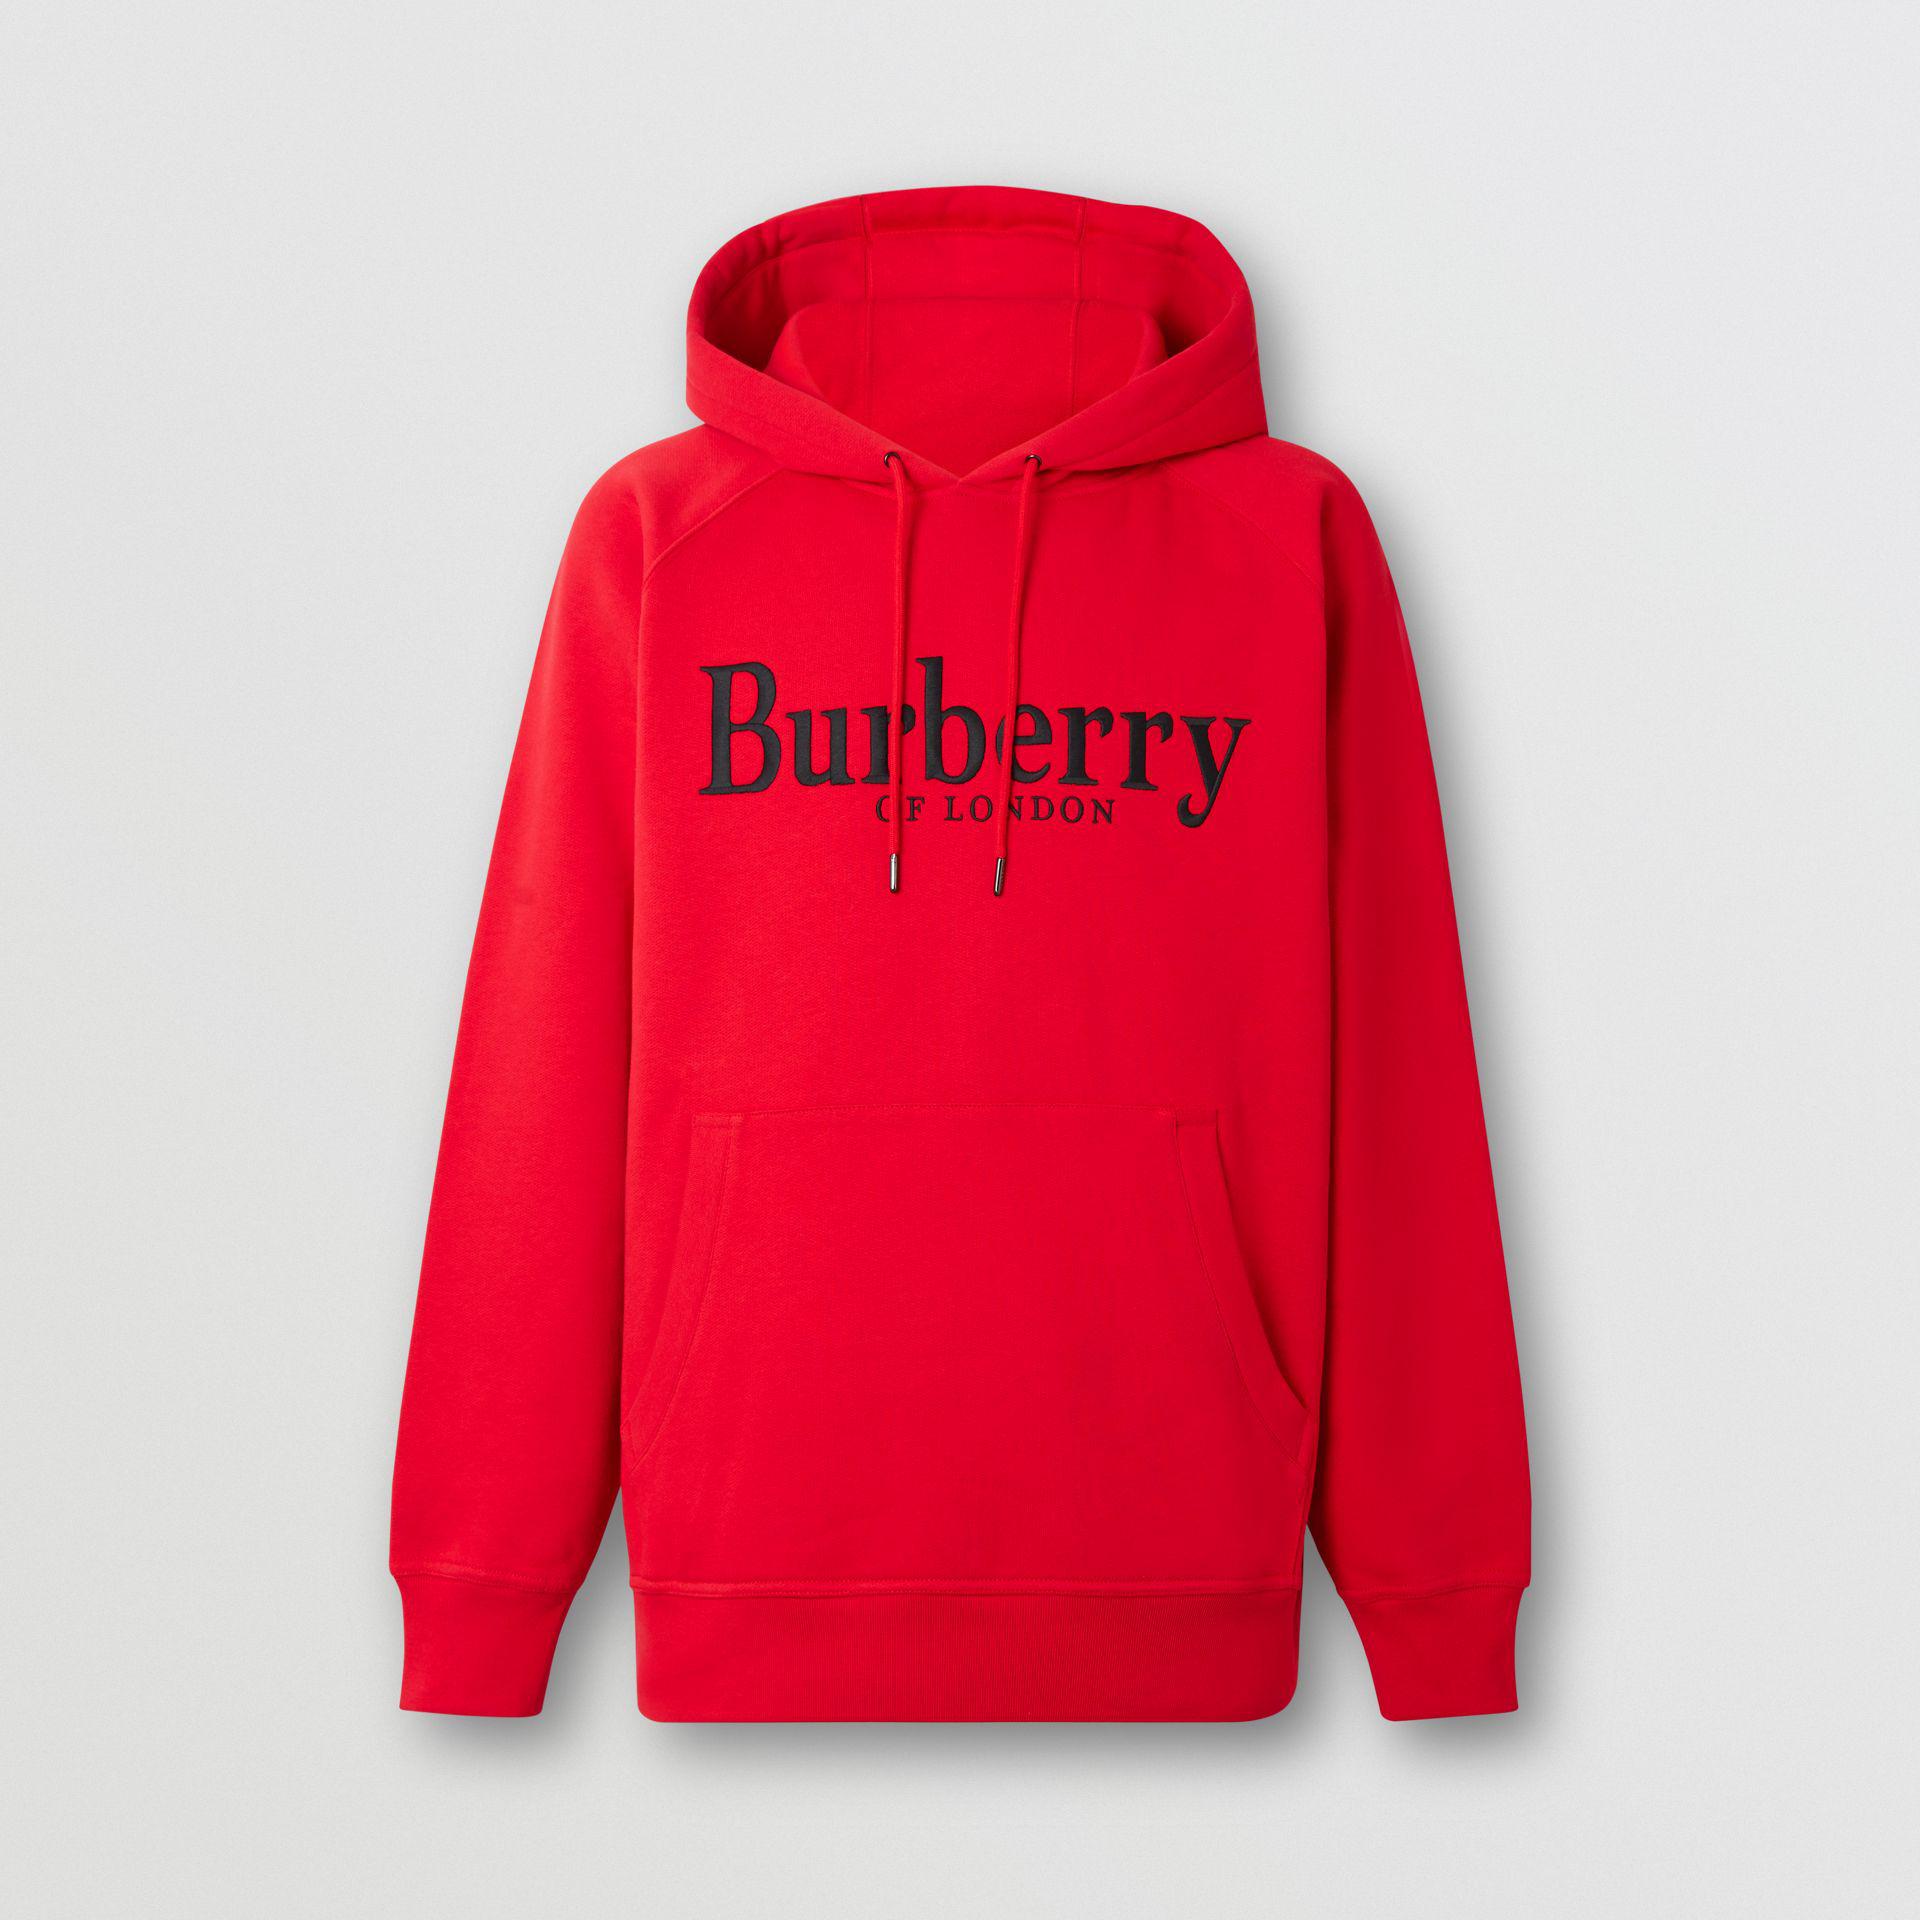 burberry embroidered logo jersey hoodie